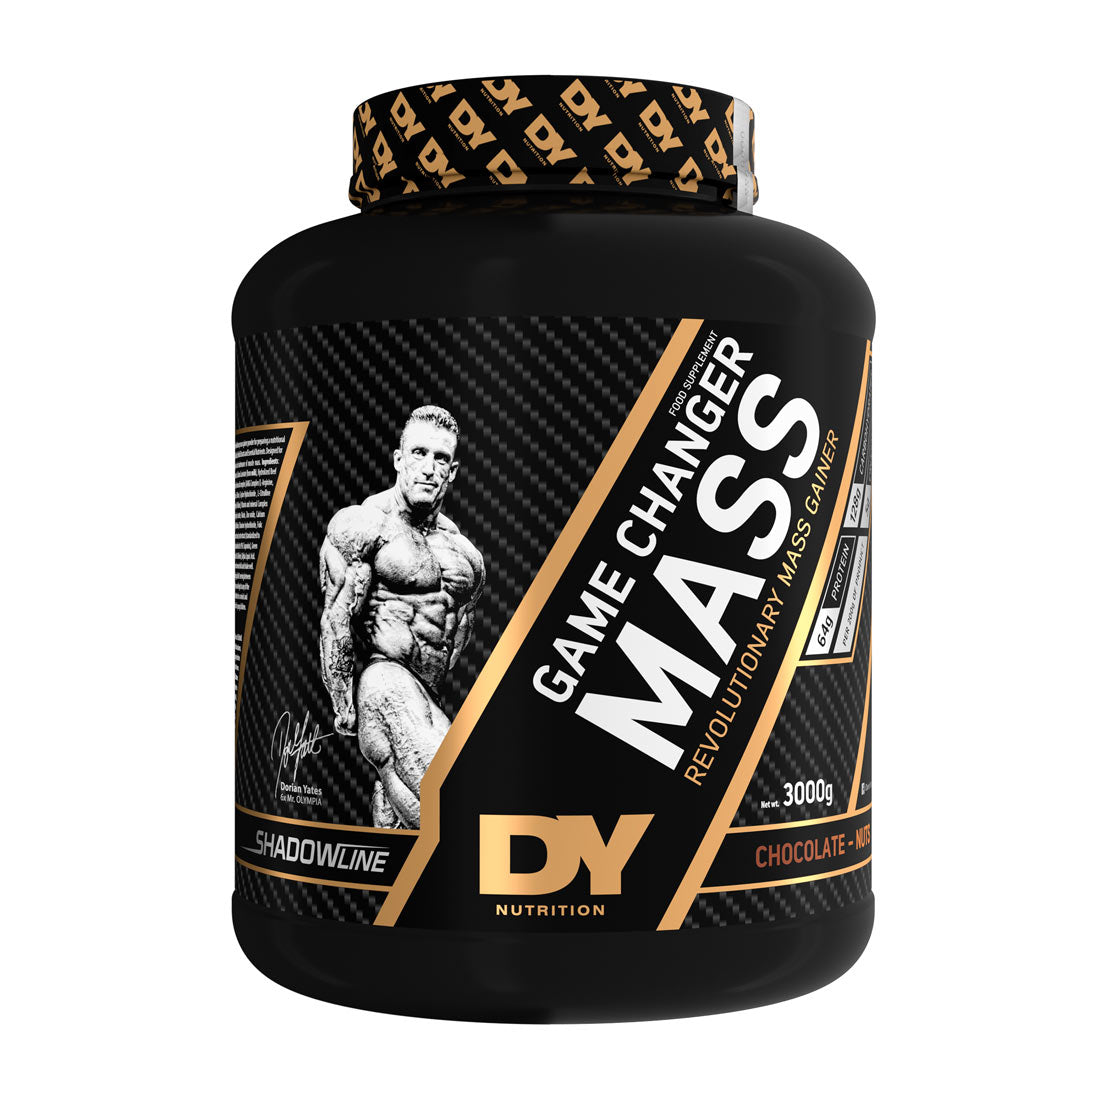 DY Nutrition Shadowline Game Changer Mass - 3kg